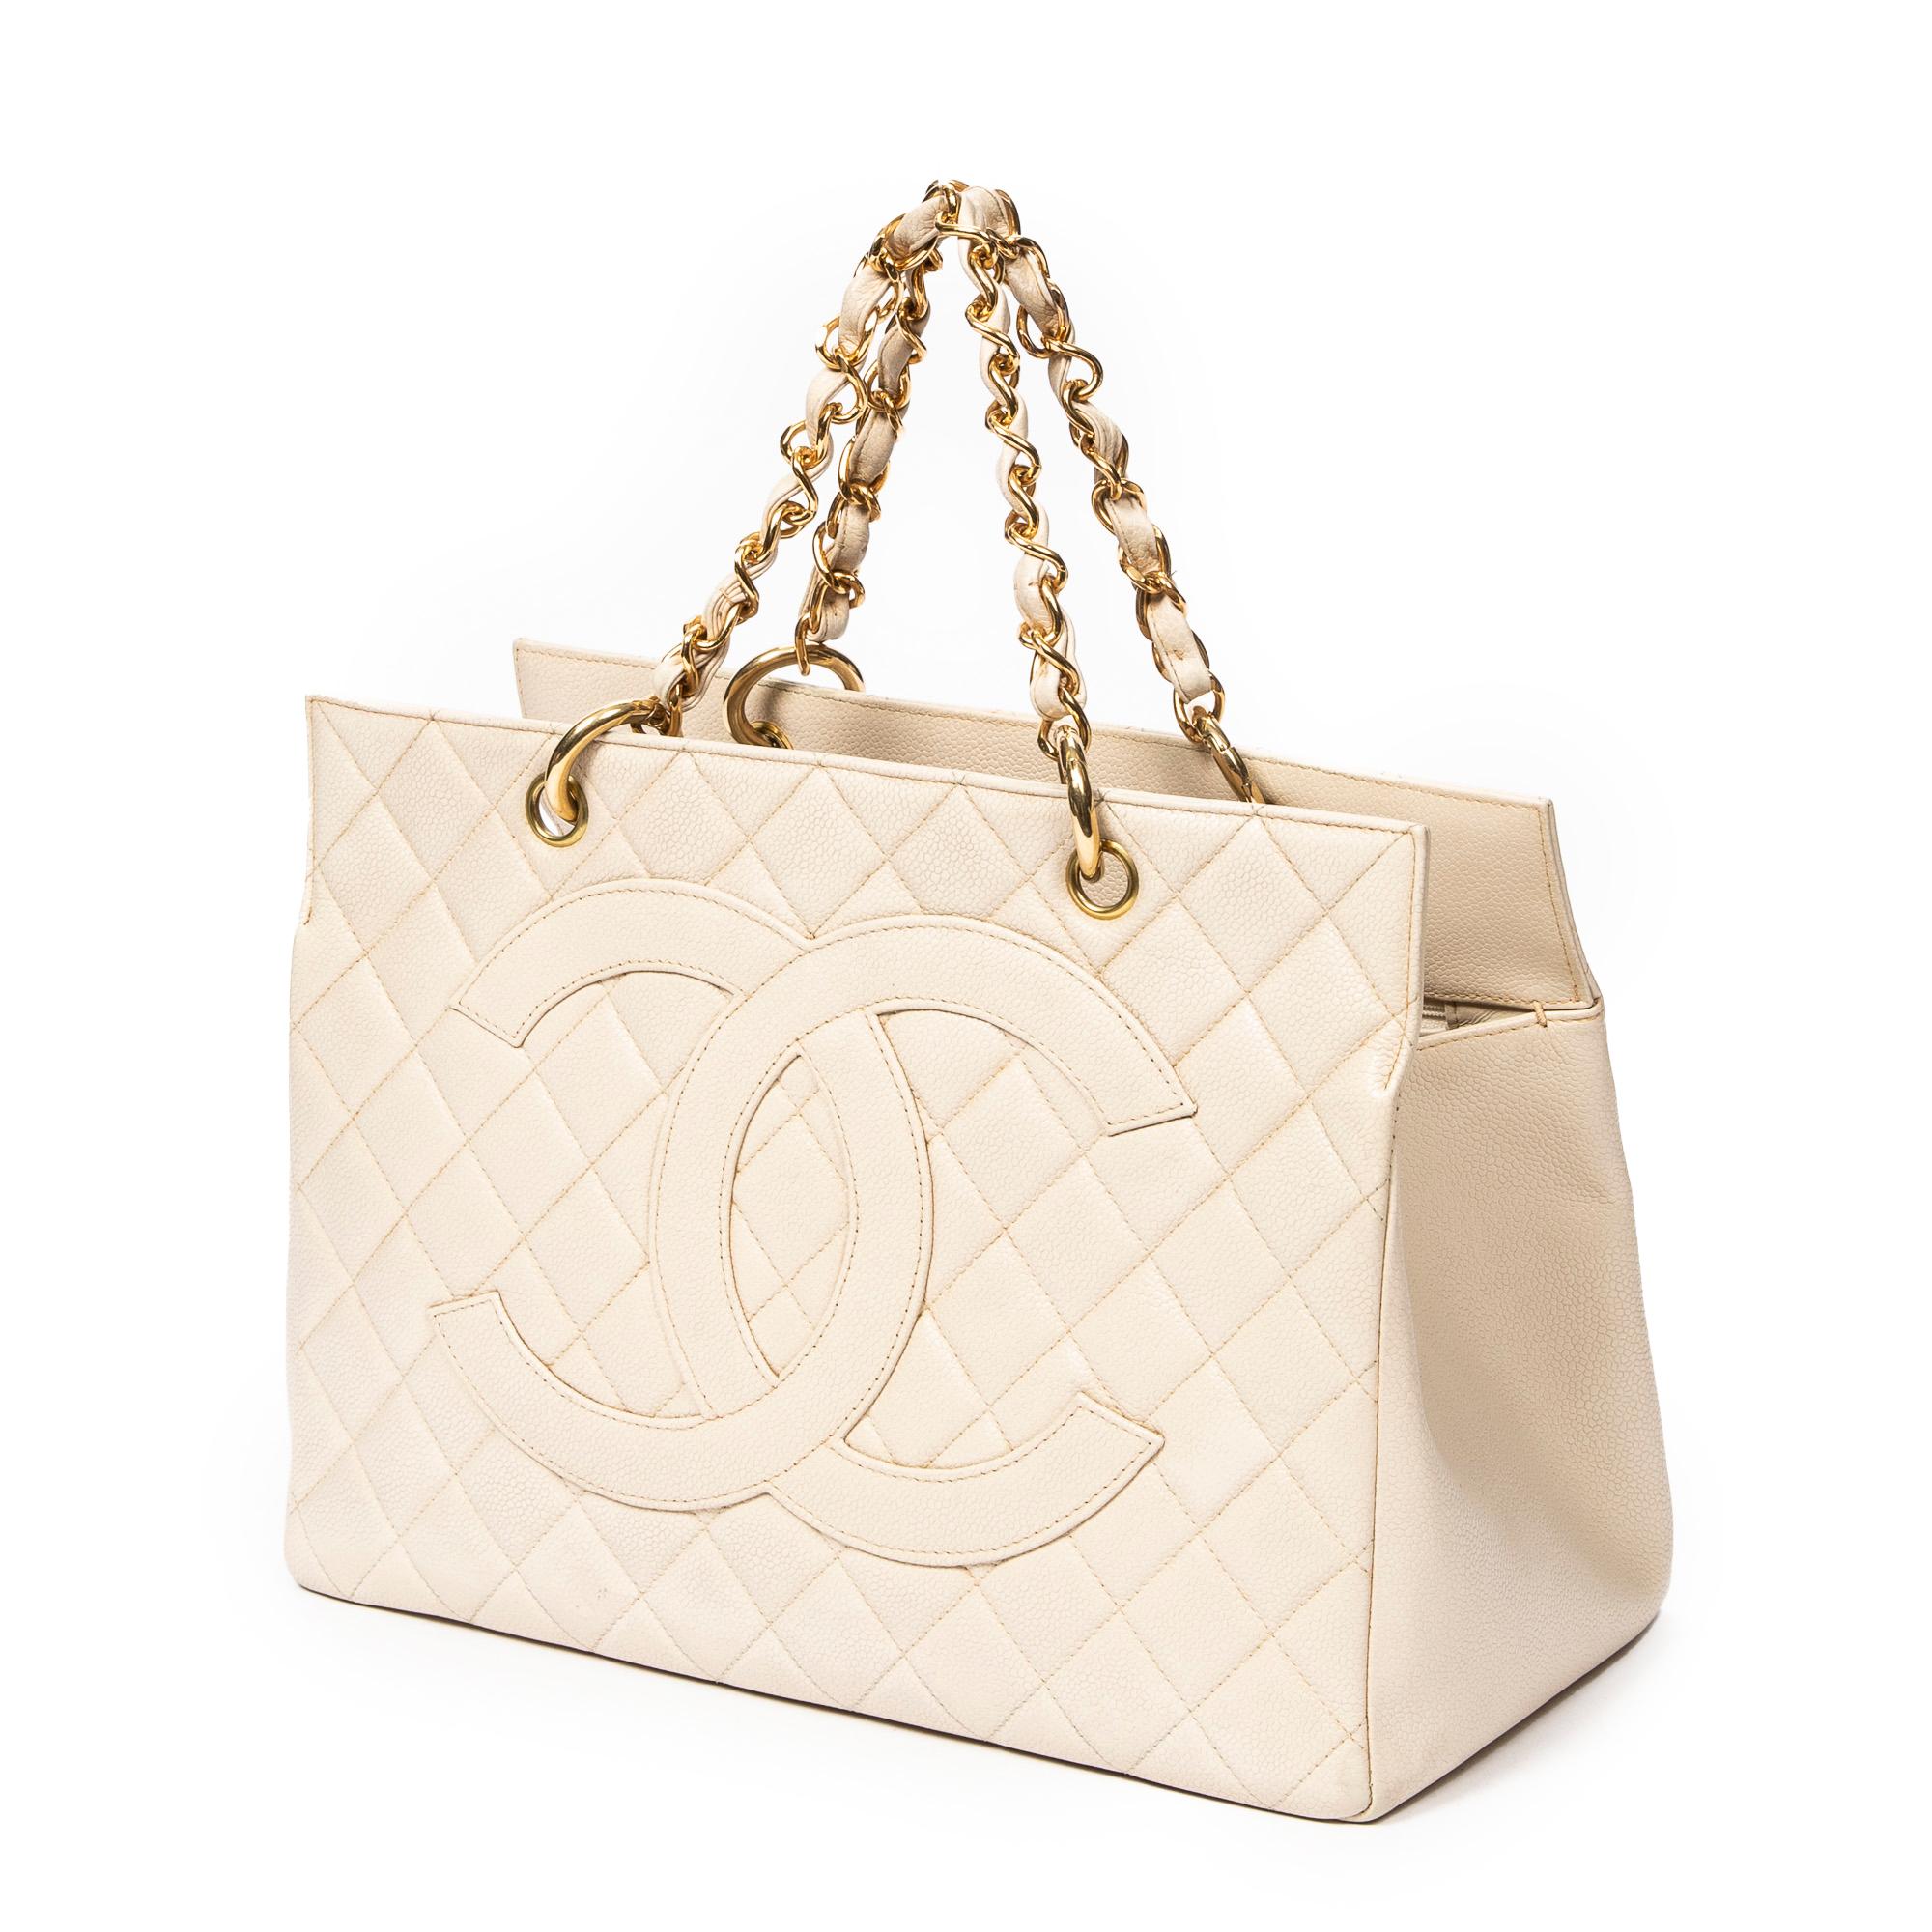 Introducing the Chanel Ivory Grand Shopping Tote: an epitome of timeless elegance. Crafted from luxurious quilted caviar leather in a pristine ivory hue, this tote exudes sophistication. Adorned with gleaming gold hardware, it boasts a classic